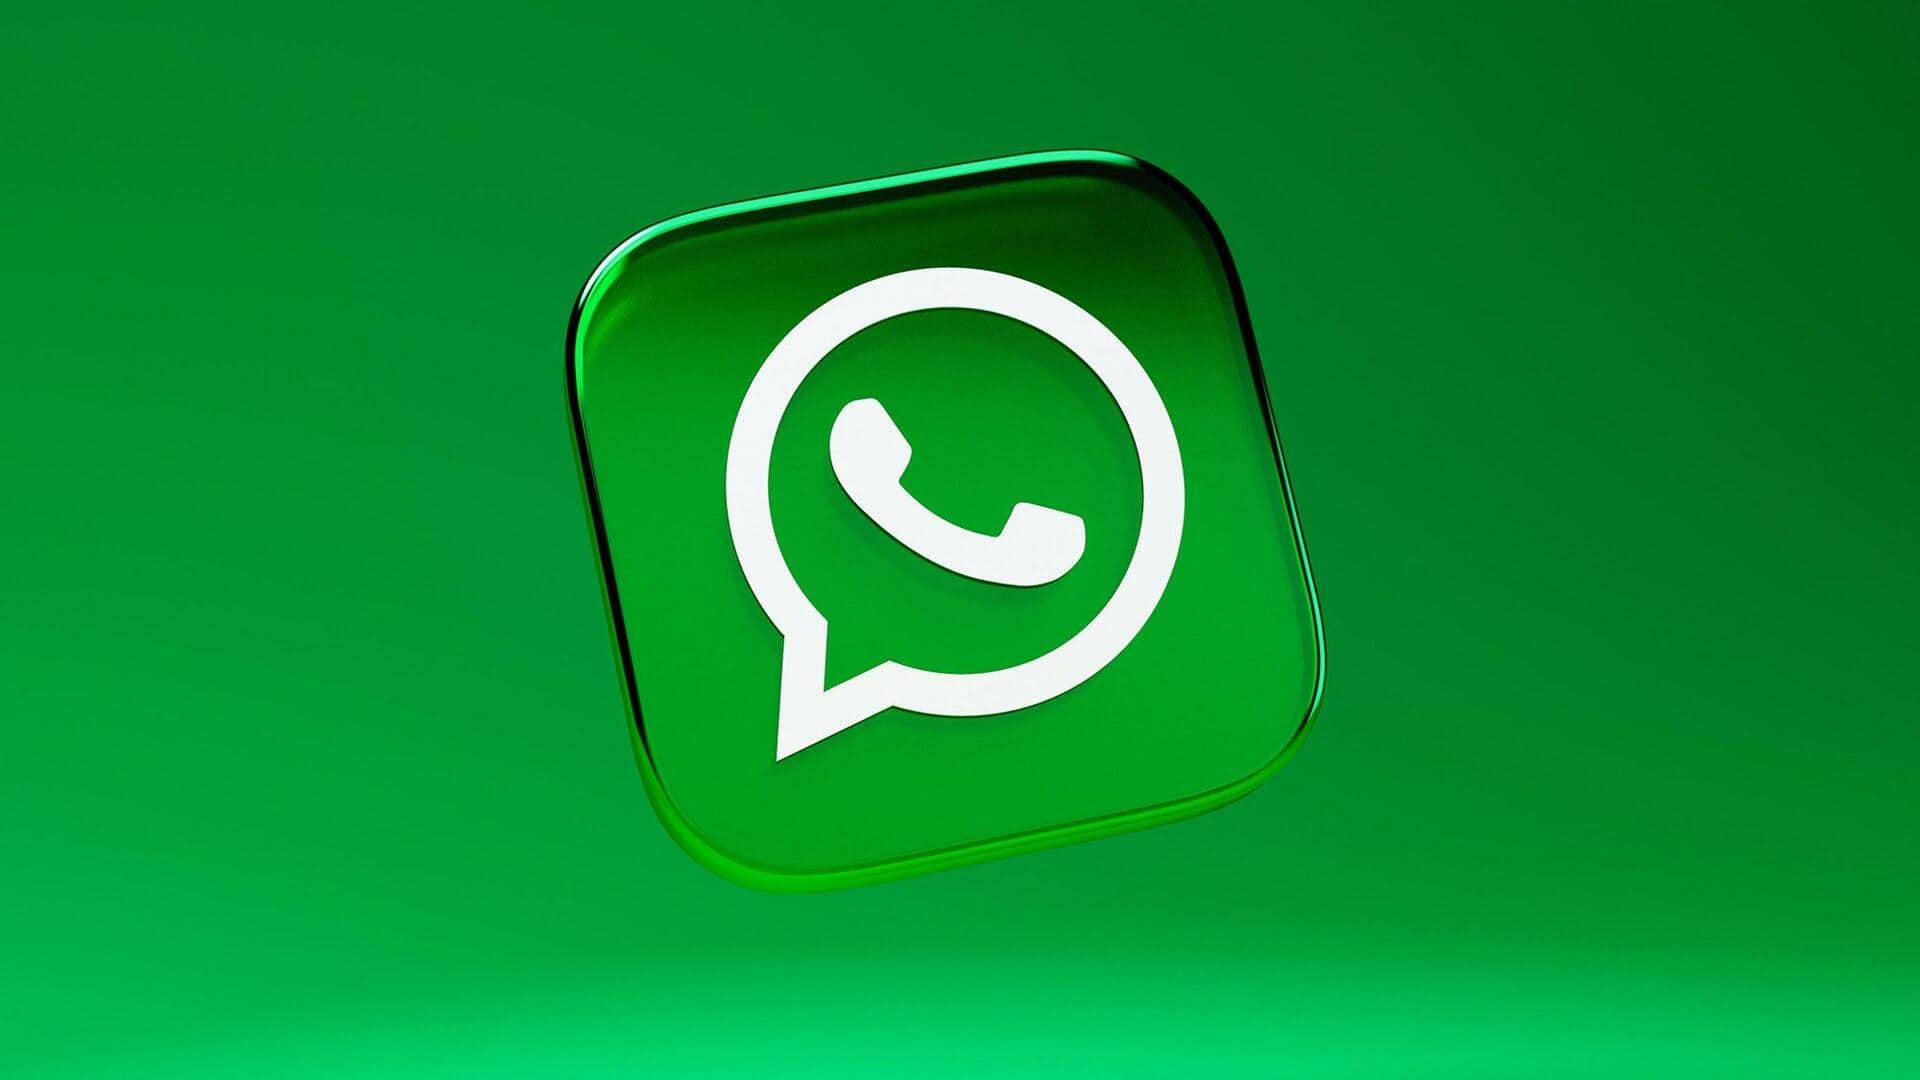 WhatsApp working on hidden group chats feature for Android